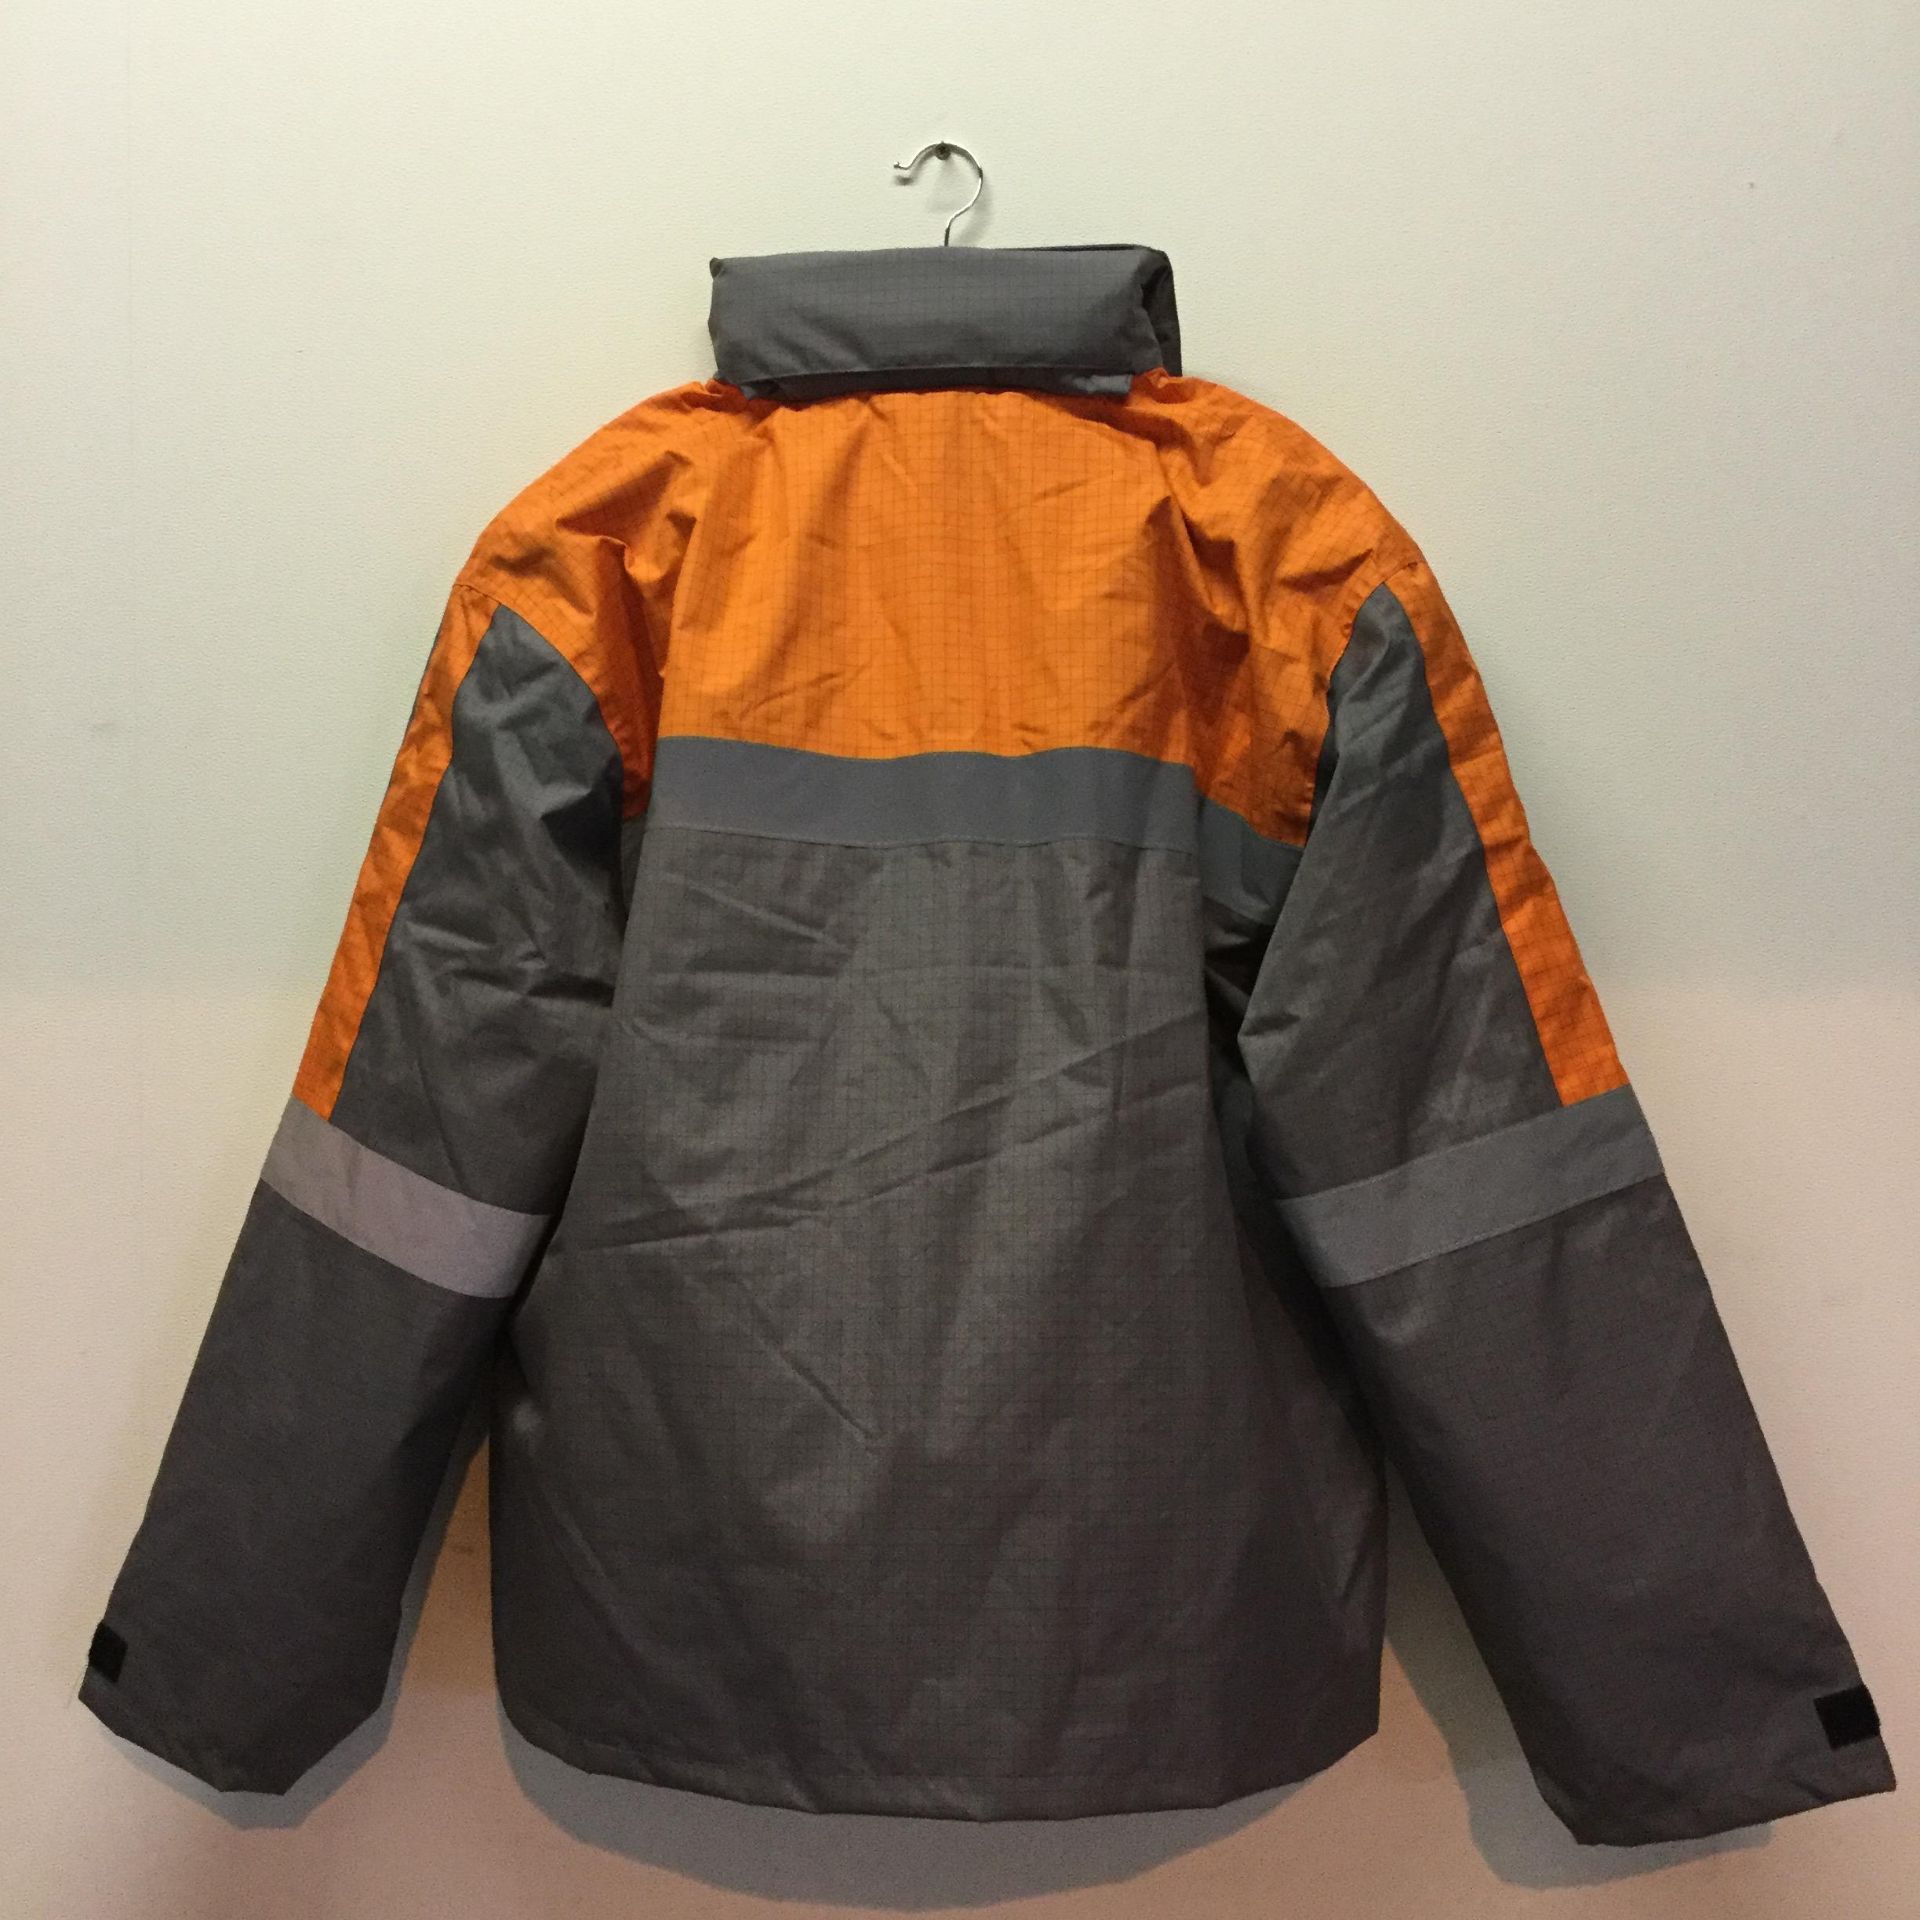 All Weather 3 layer Gortex Antistatic waterproof jacket - Size 50 - Image 2 of 2